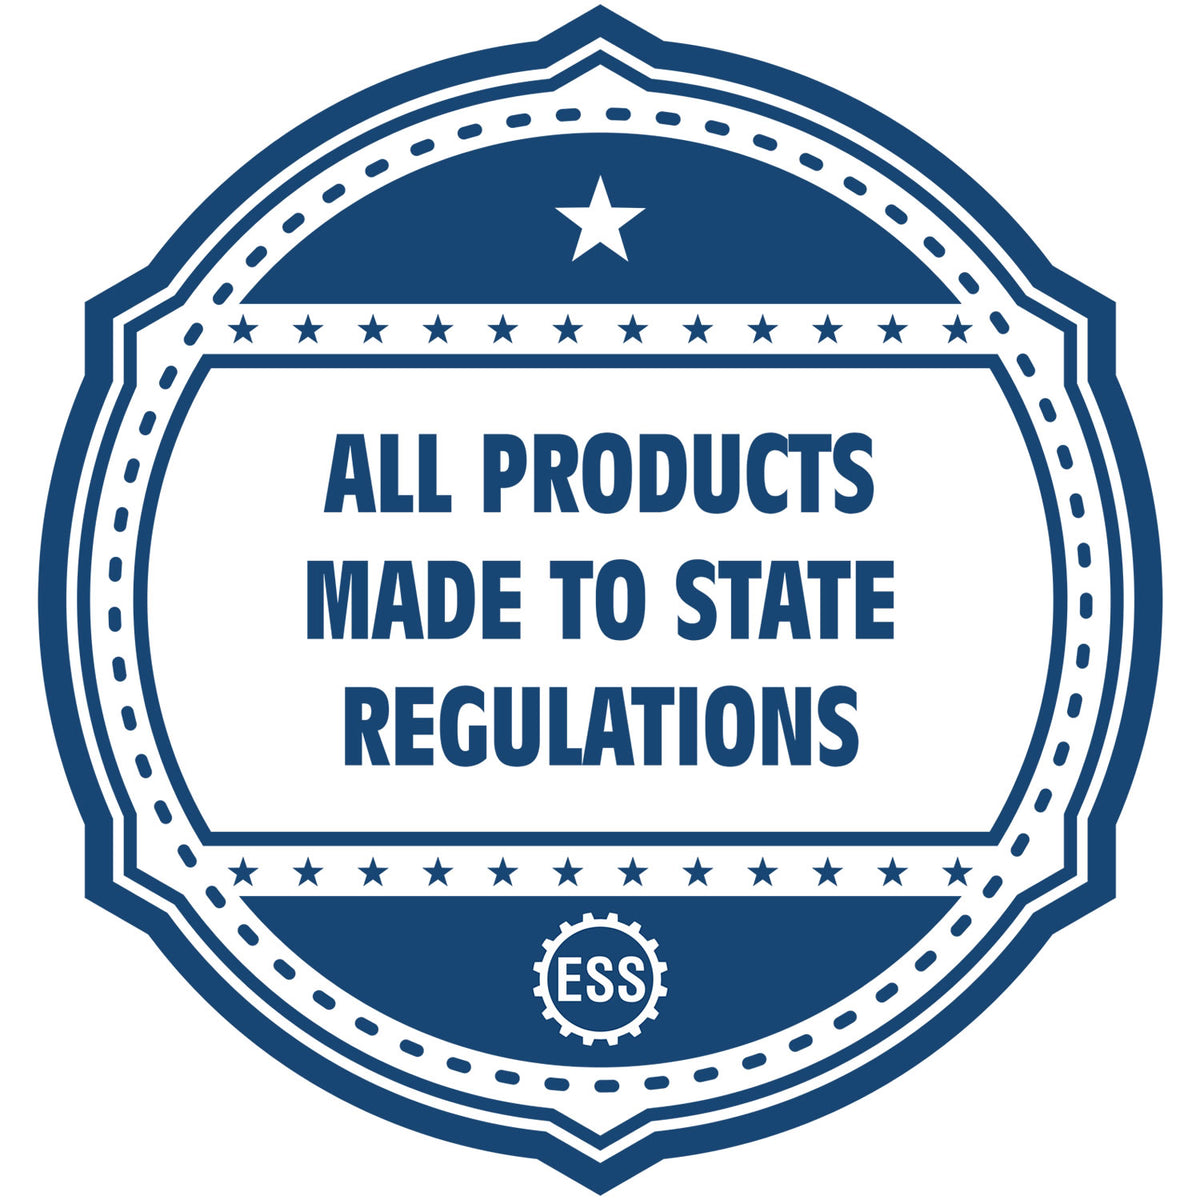 An icon or badge element for the Soft Pocket Washington Landscape Architect Embosser showing that this product is made in compliance with state regulations.